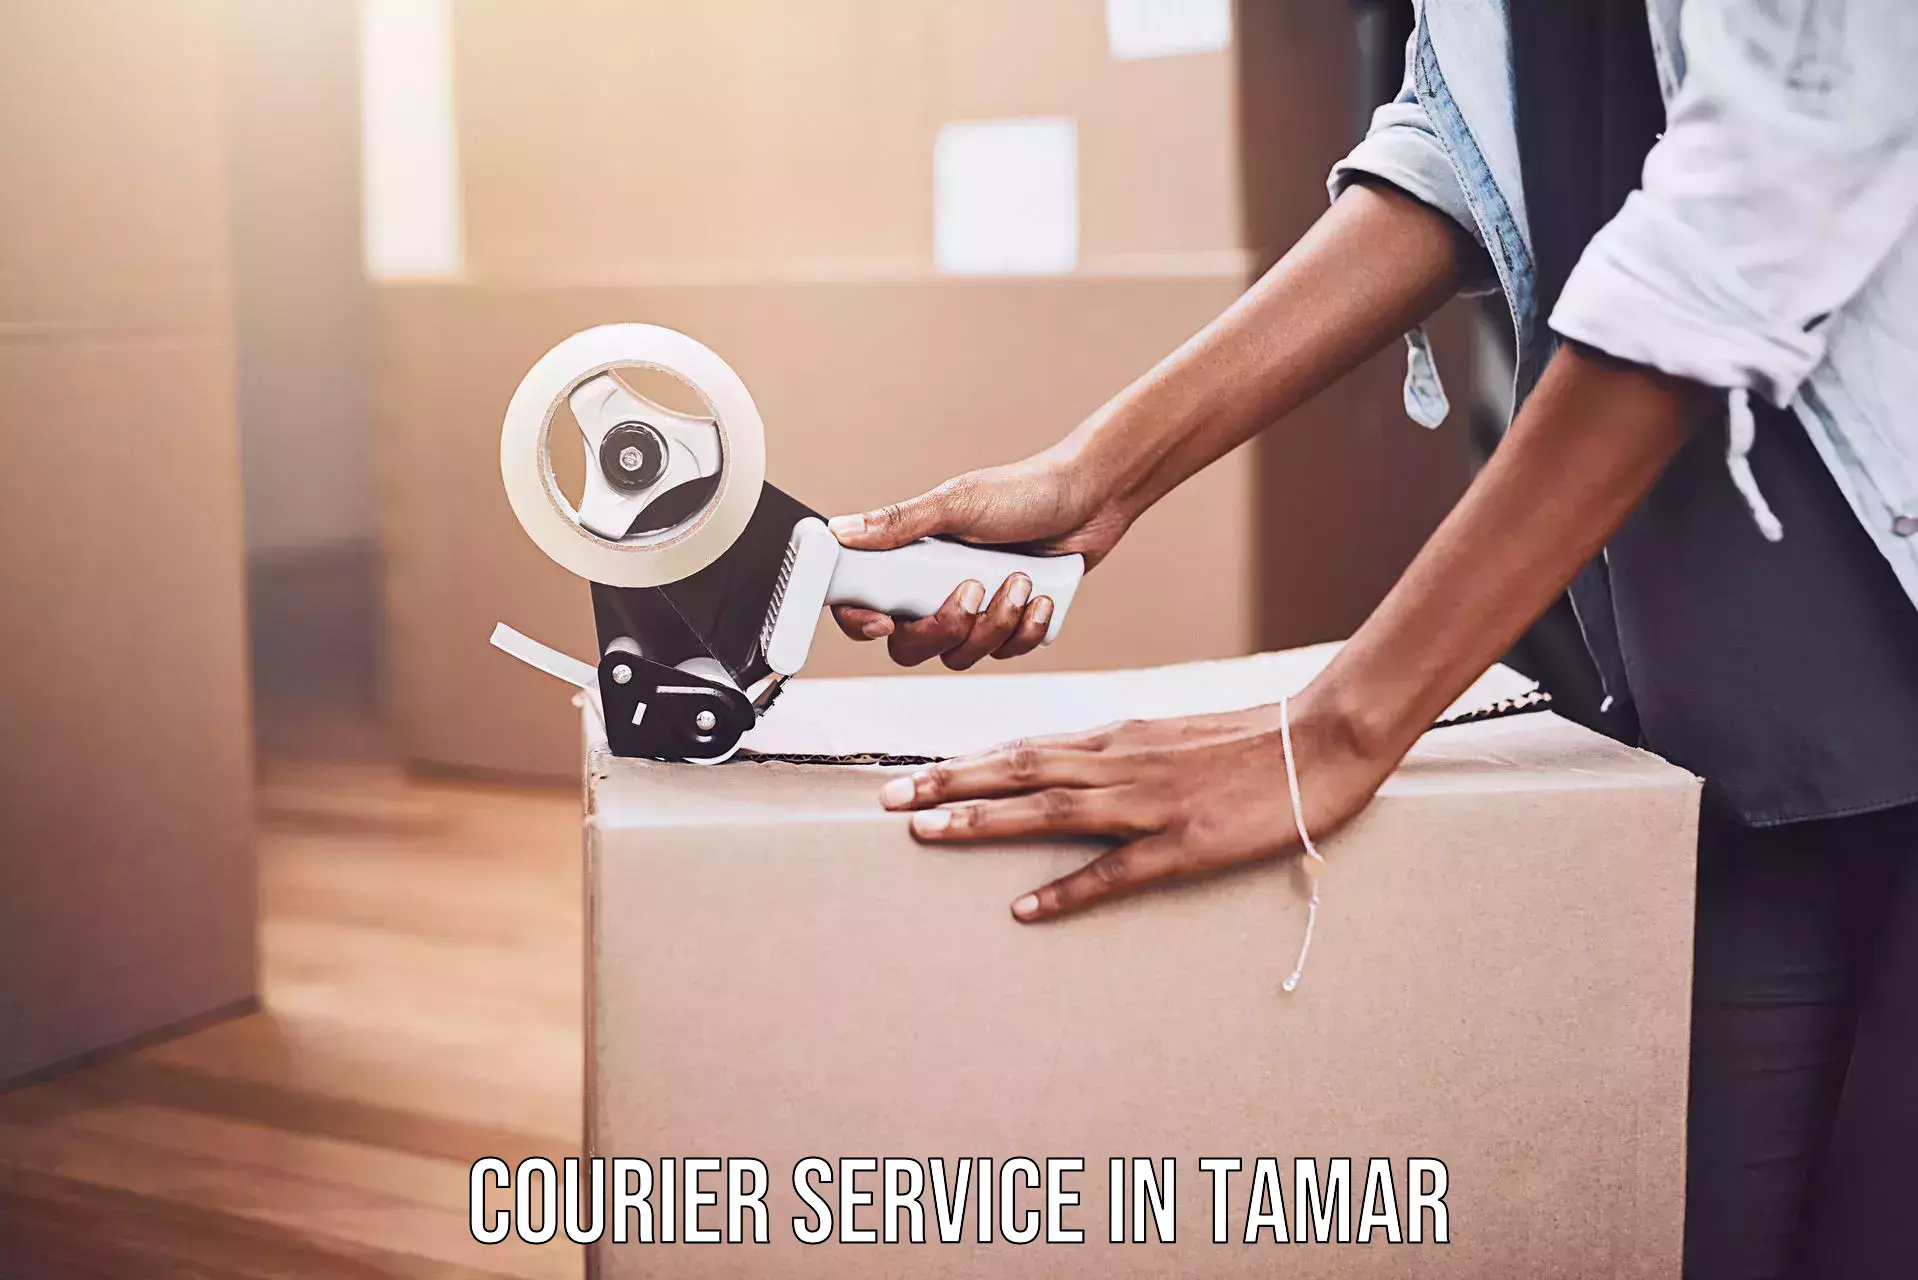 Integrated courier services in Tamar